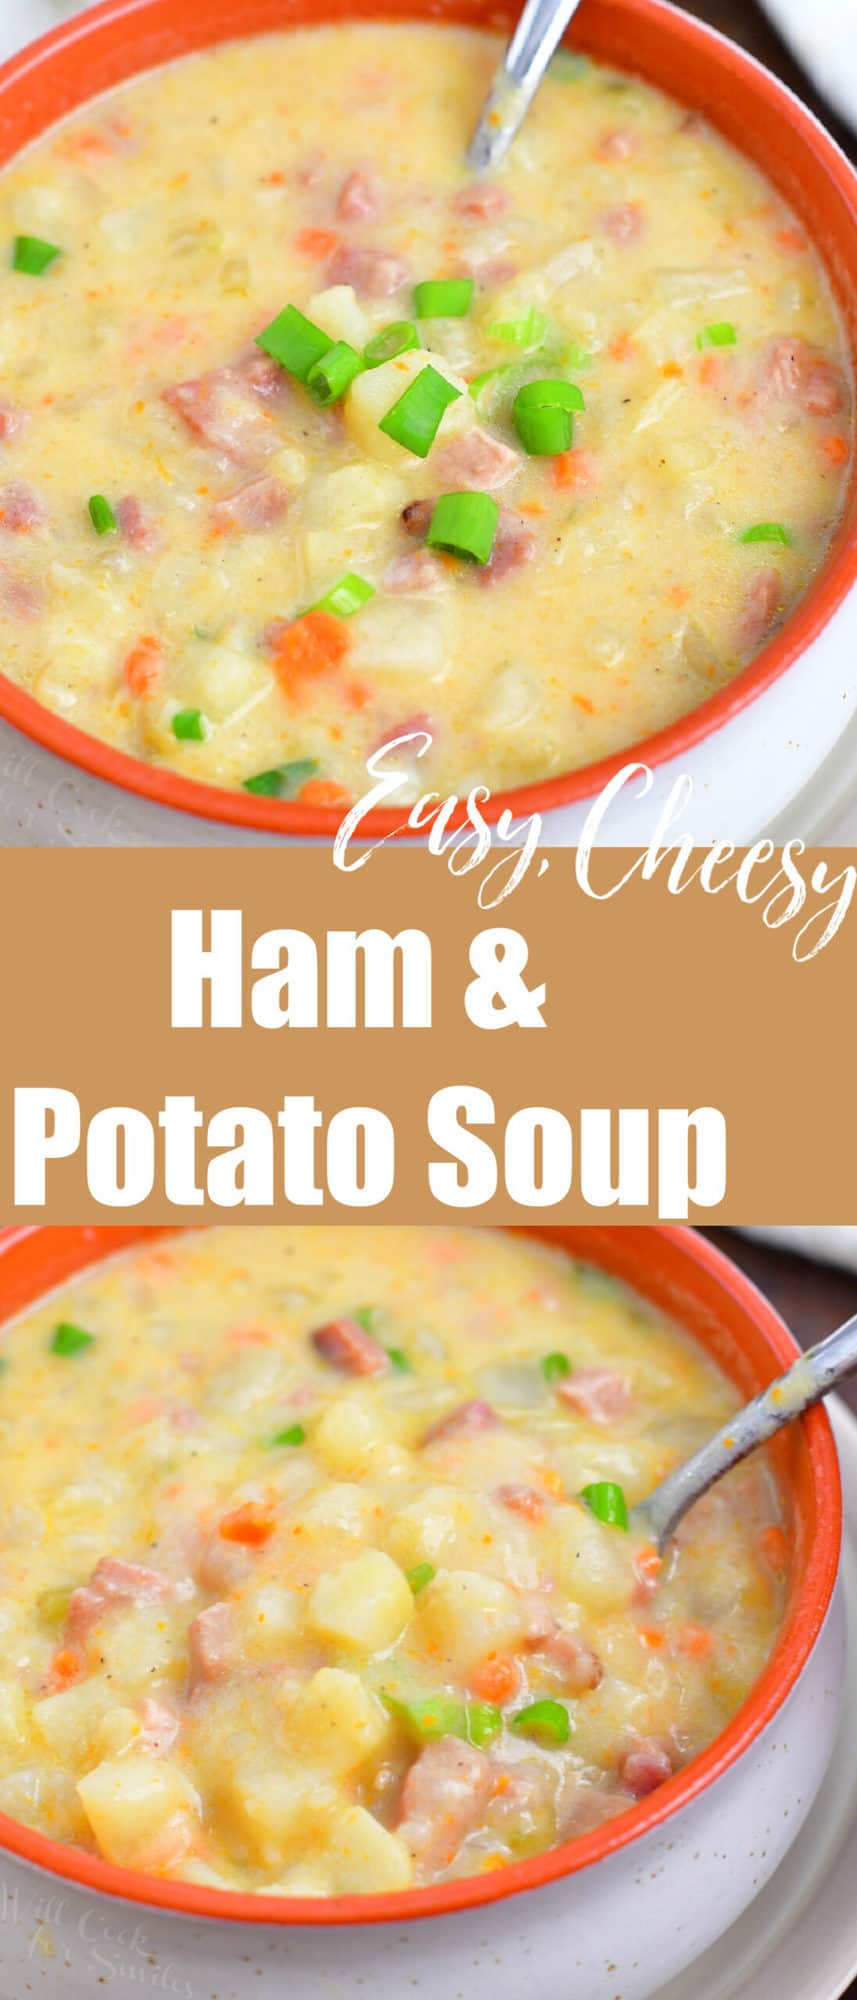 titled image for Pinterest (and shown): Easy Cheesy Ham and Potato Soup